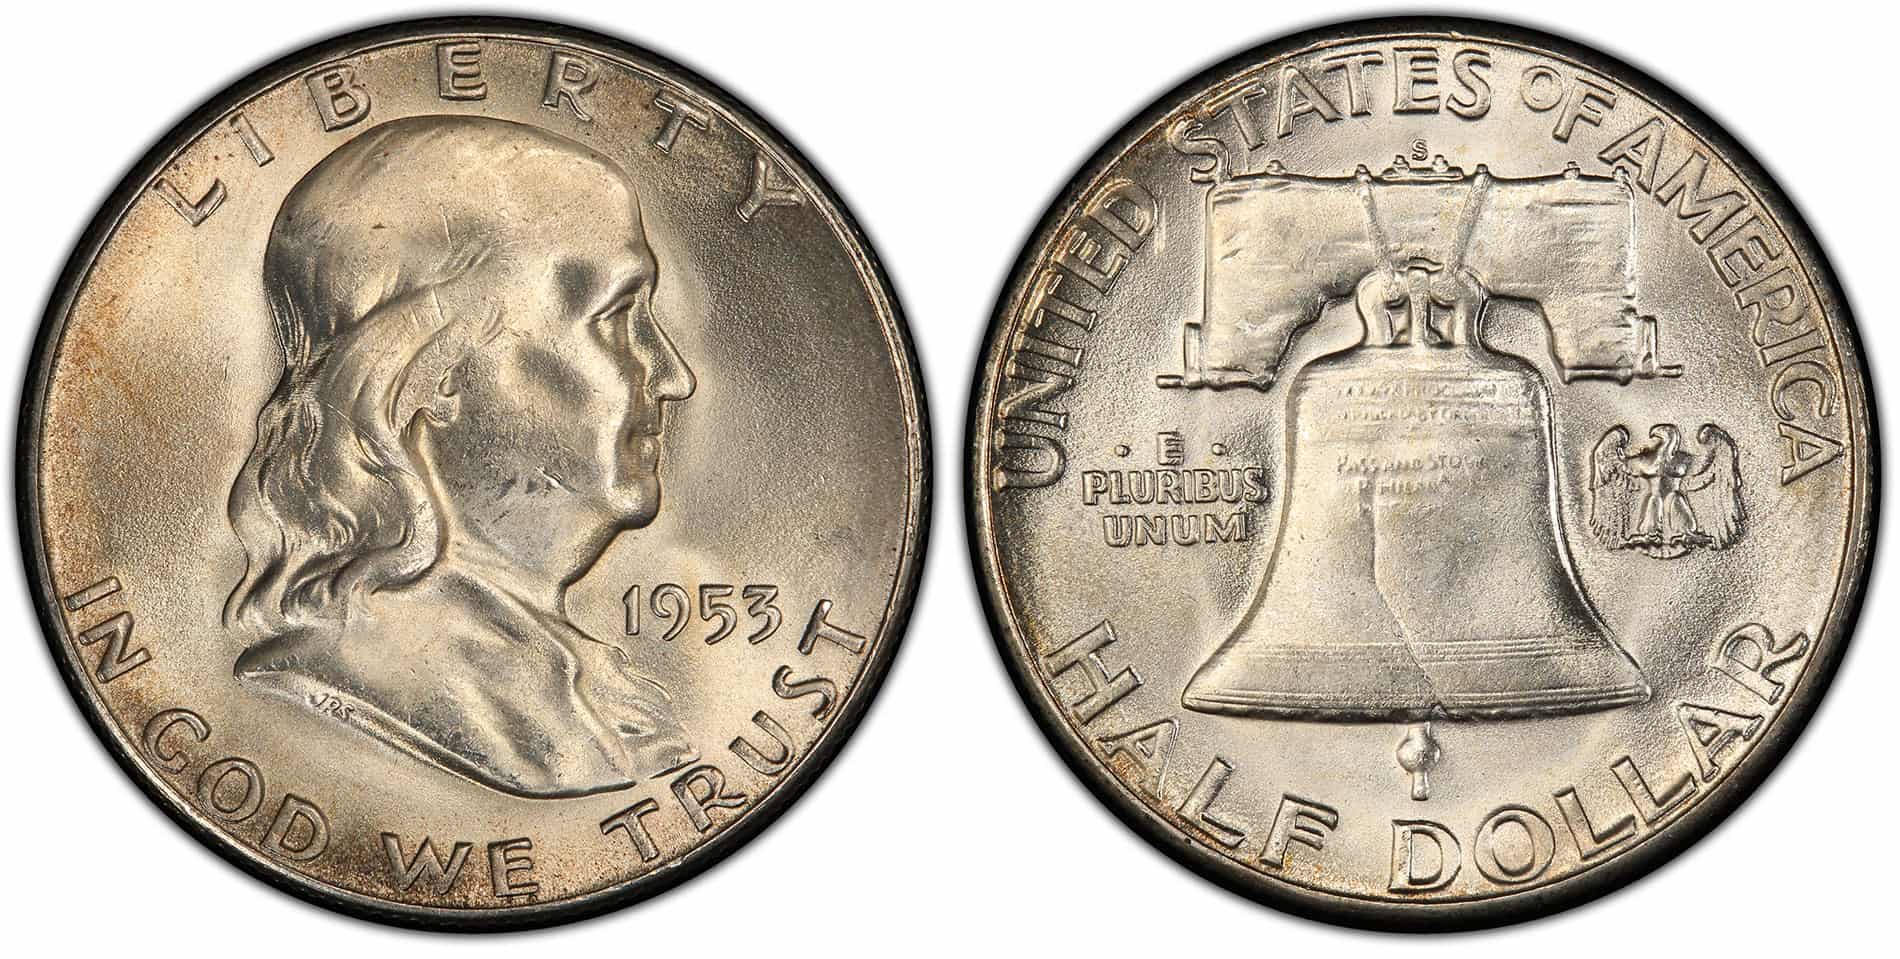 Franklin Half Dollars and Full Bell Lines